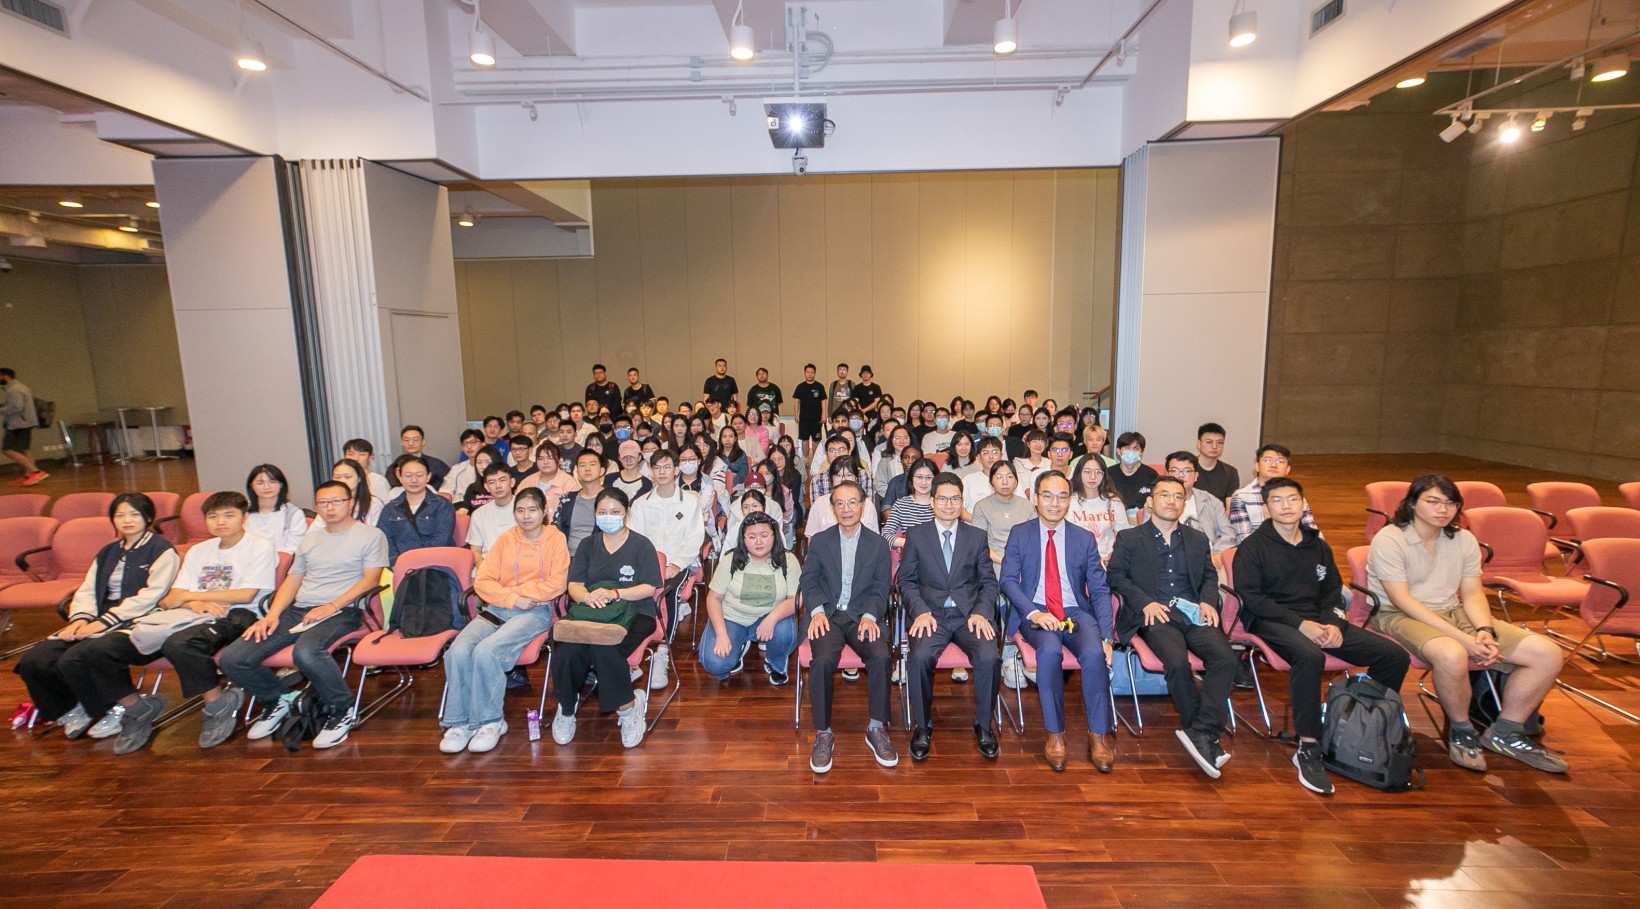 Under Secretary for Financial Services and the Treasury Joseph Chan discusses the latest development of Hong Kong’s finance with students.